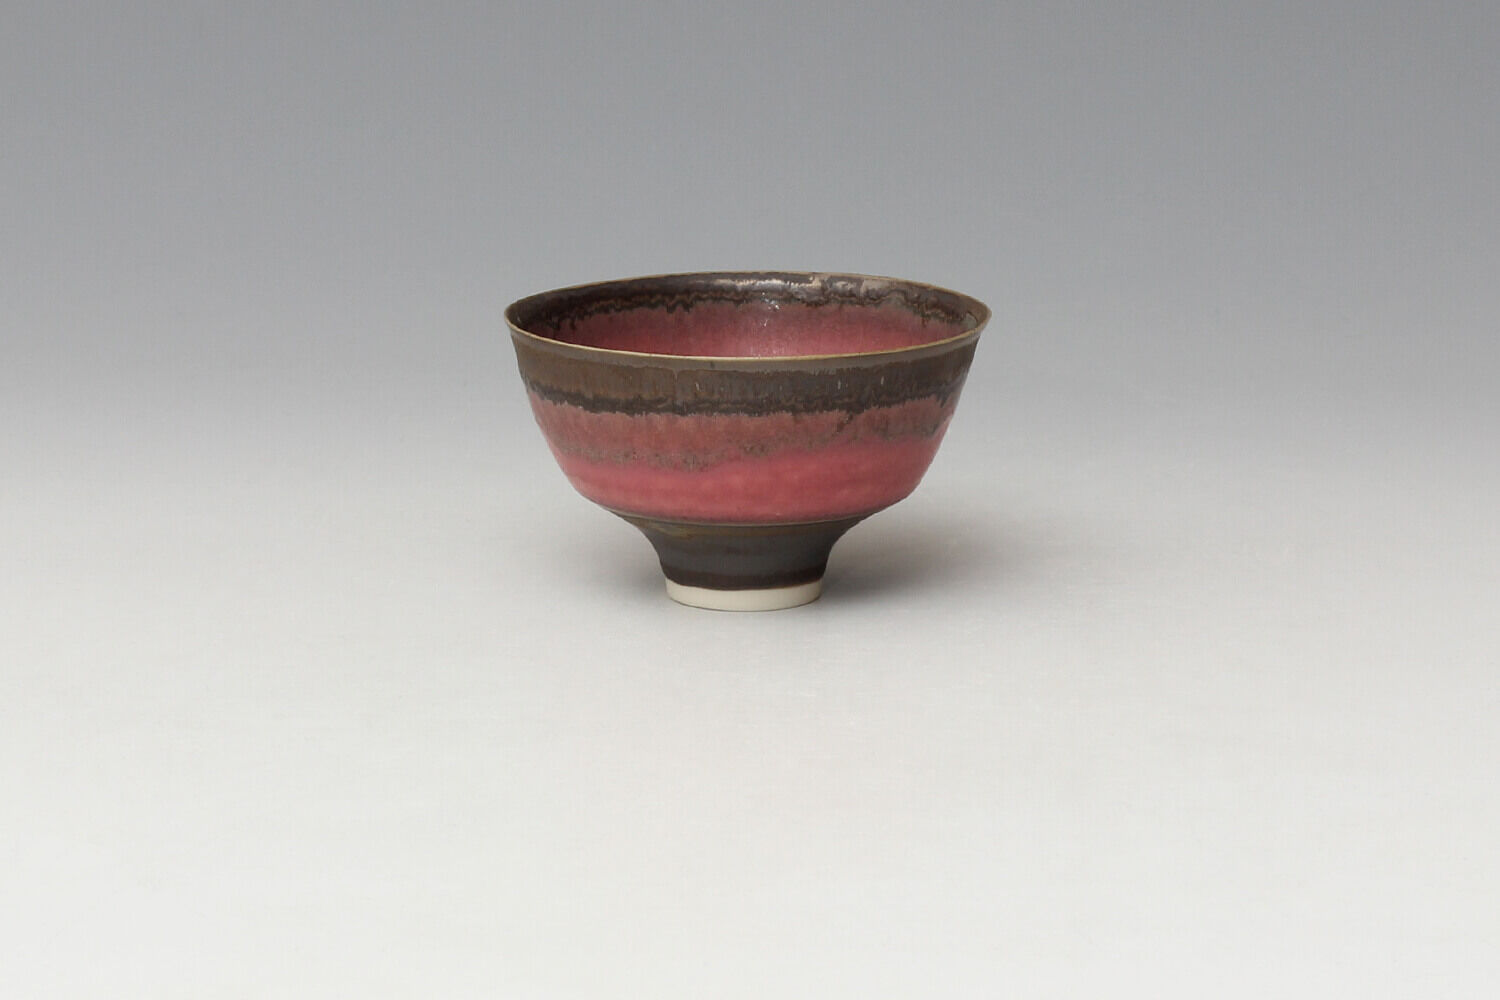 Peter Wills Small Porcelain Bowl 217